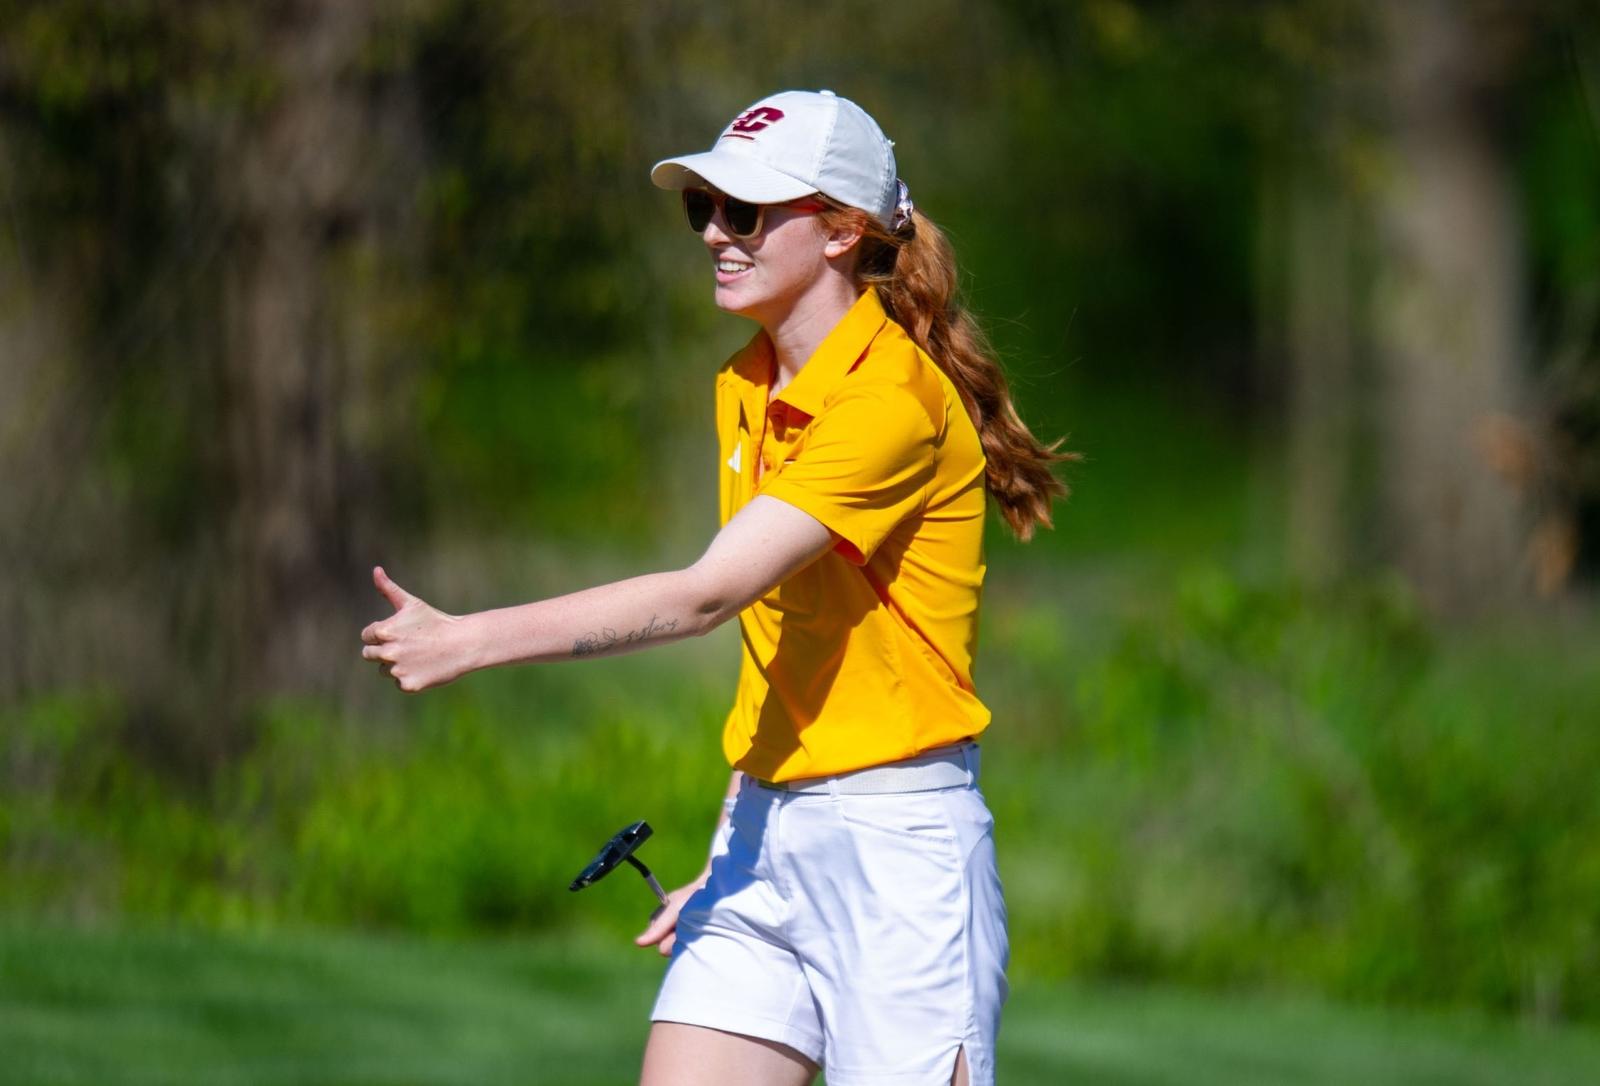 Baustad (77) Leads Women’s Golf at MAC Championship; Chippewas 5th Heading into Final Round